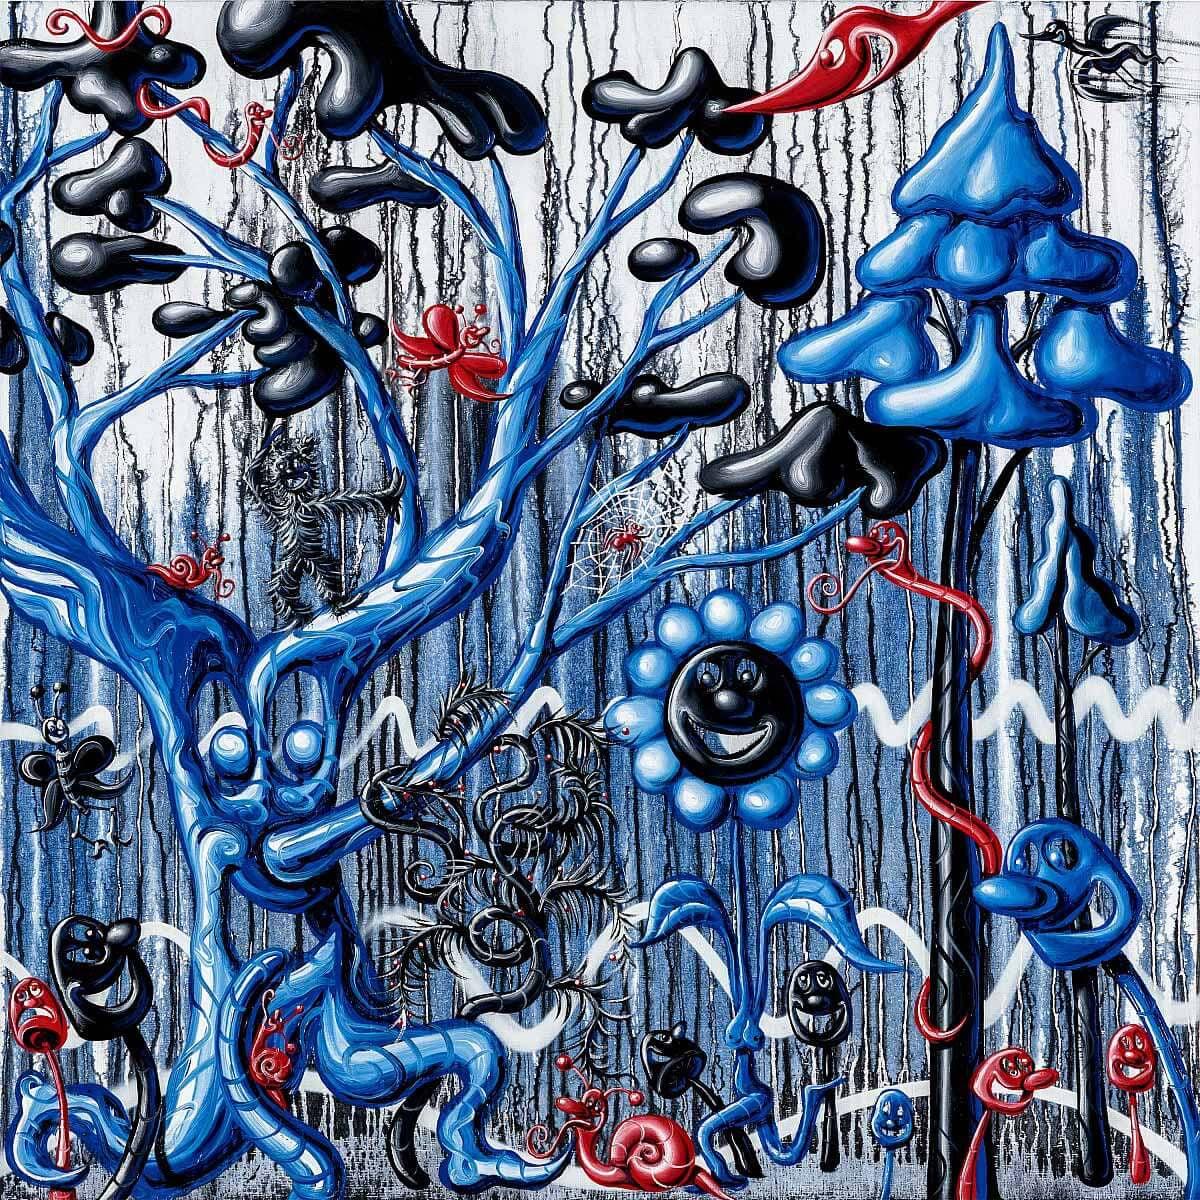 Artist: Kenny Scharf
Title: Furungle Blue
Medium: Archival pigment ink print with silkscreened high gloss varnish and diamond dust on Innova Etching Cotton Rag 315 gsm fine art paper
Date: 2021
Edition: PP 2/6
Sheet Size: 42" x 42"
Signature: Hand